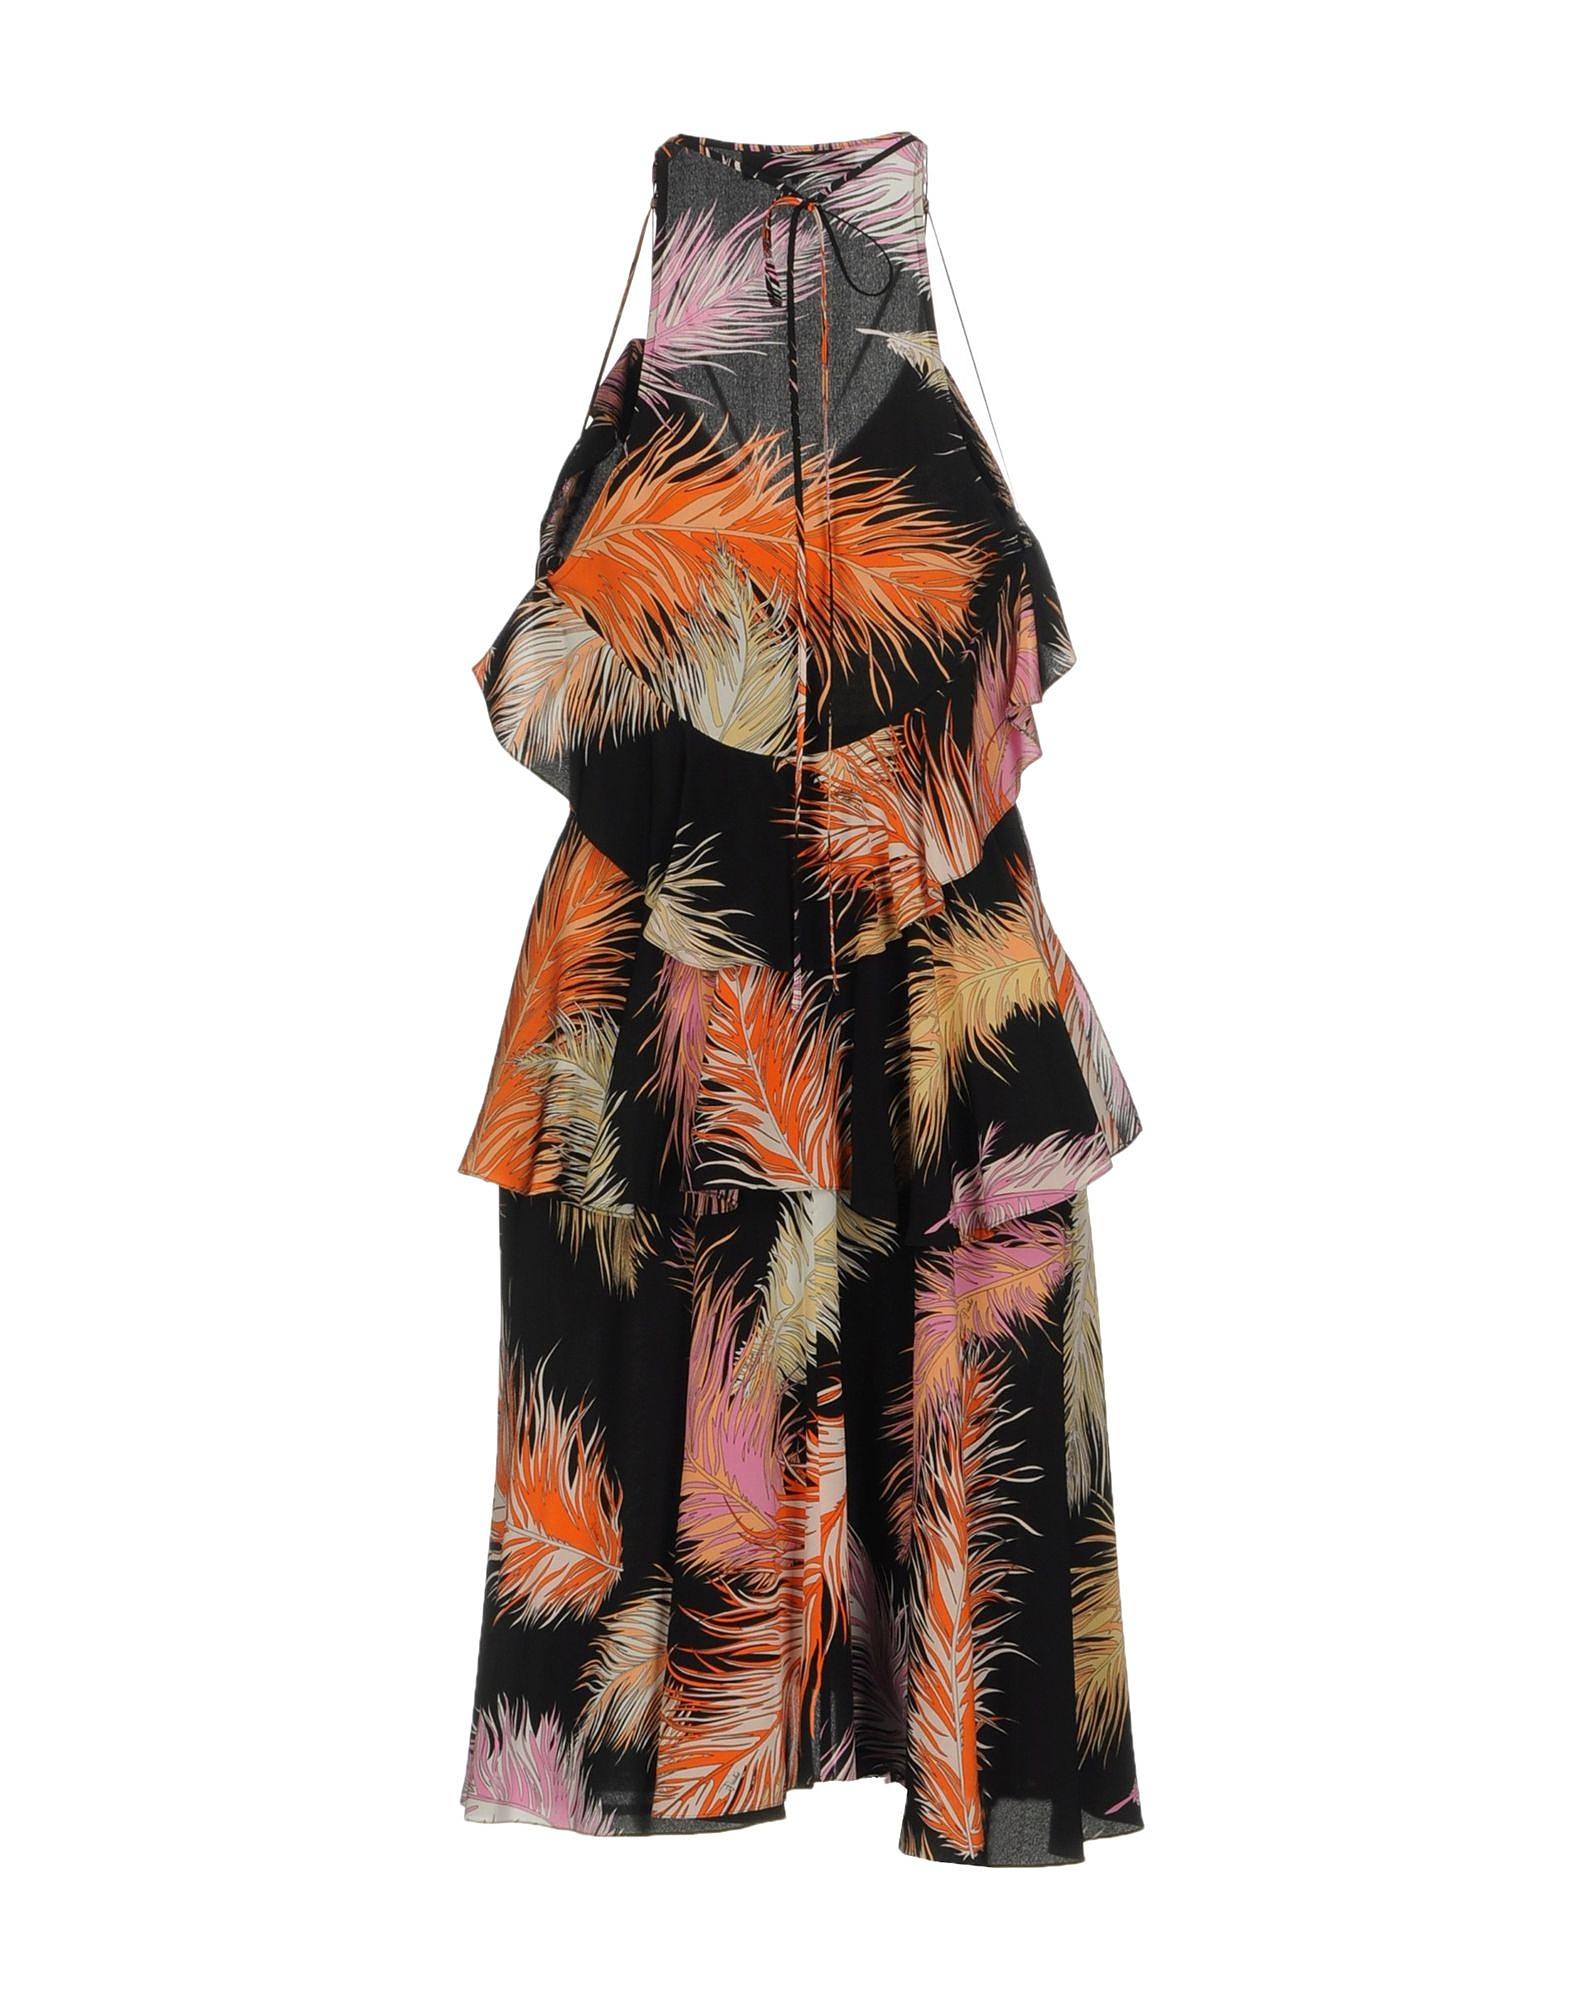 Beautiful Emilio Pucci Silk Dress
In the famous signature feather print
